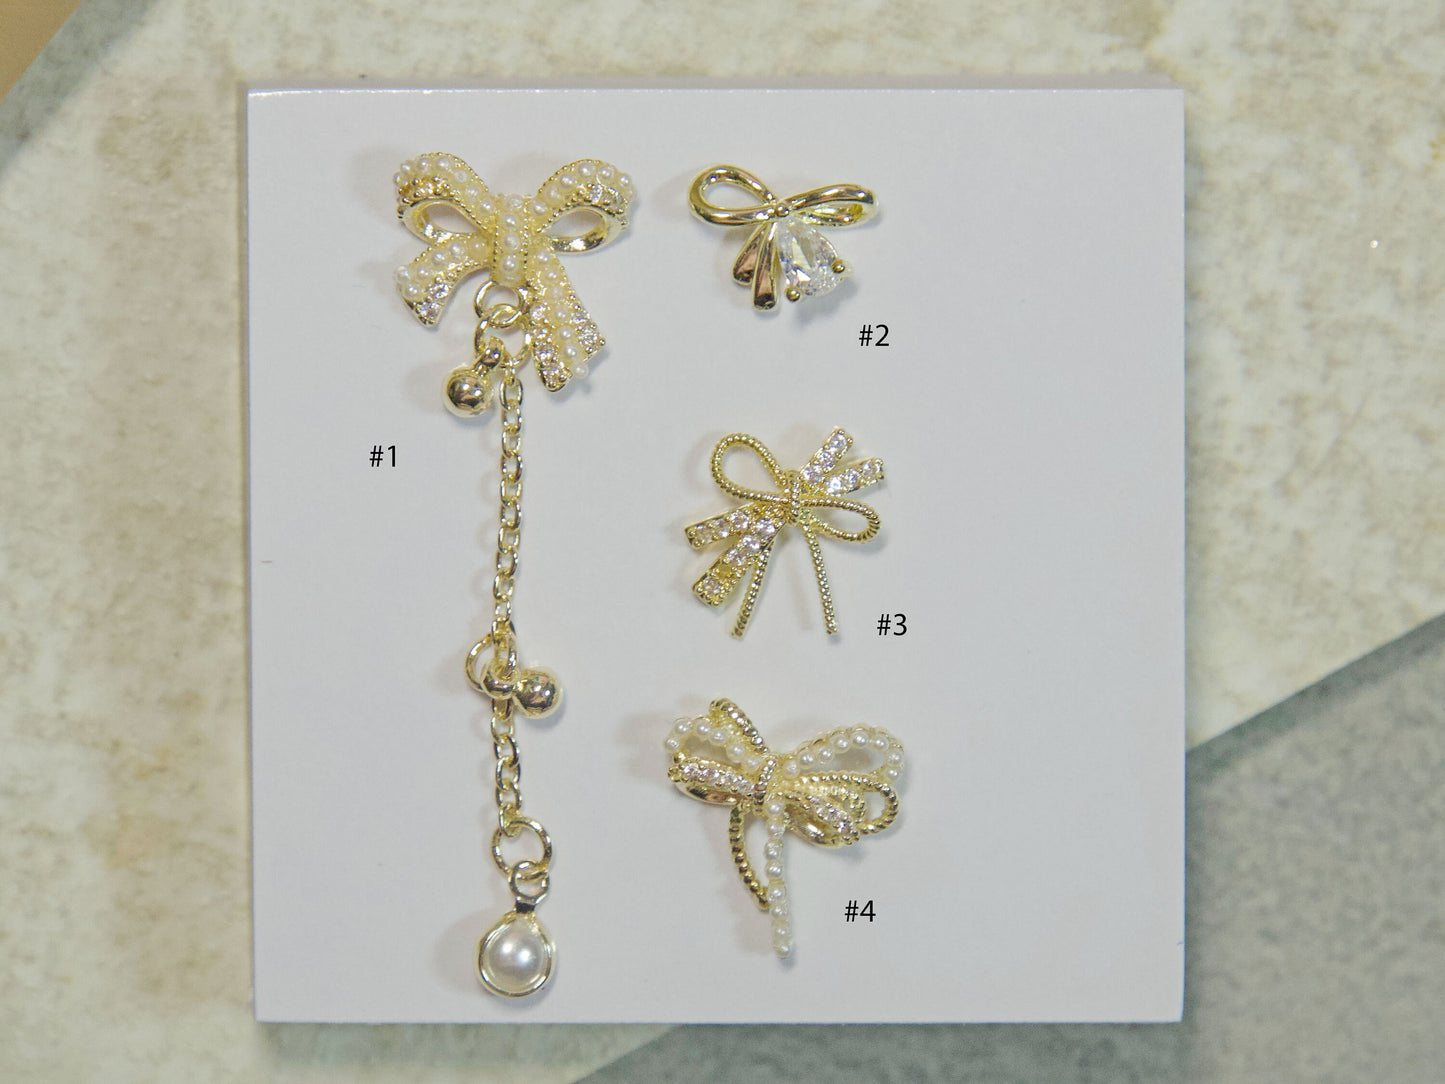 Exquisite Bow tie Nail Jewelry Gold Chain with Pearls